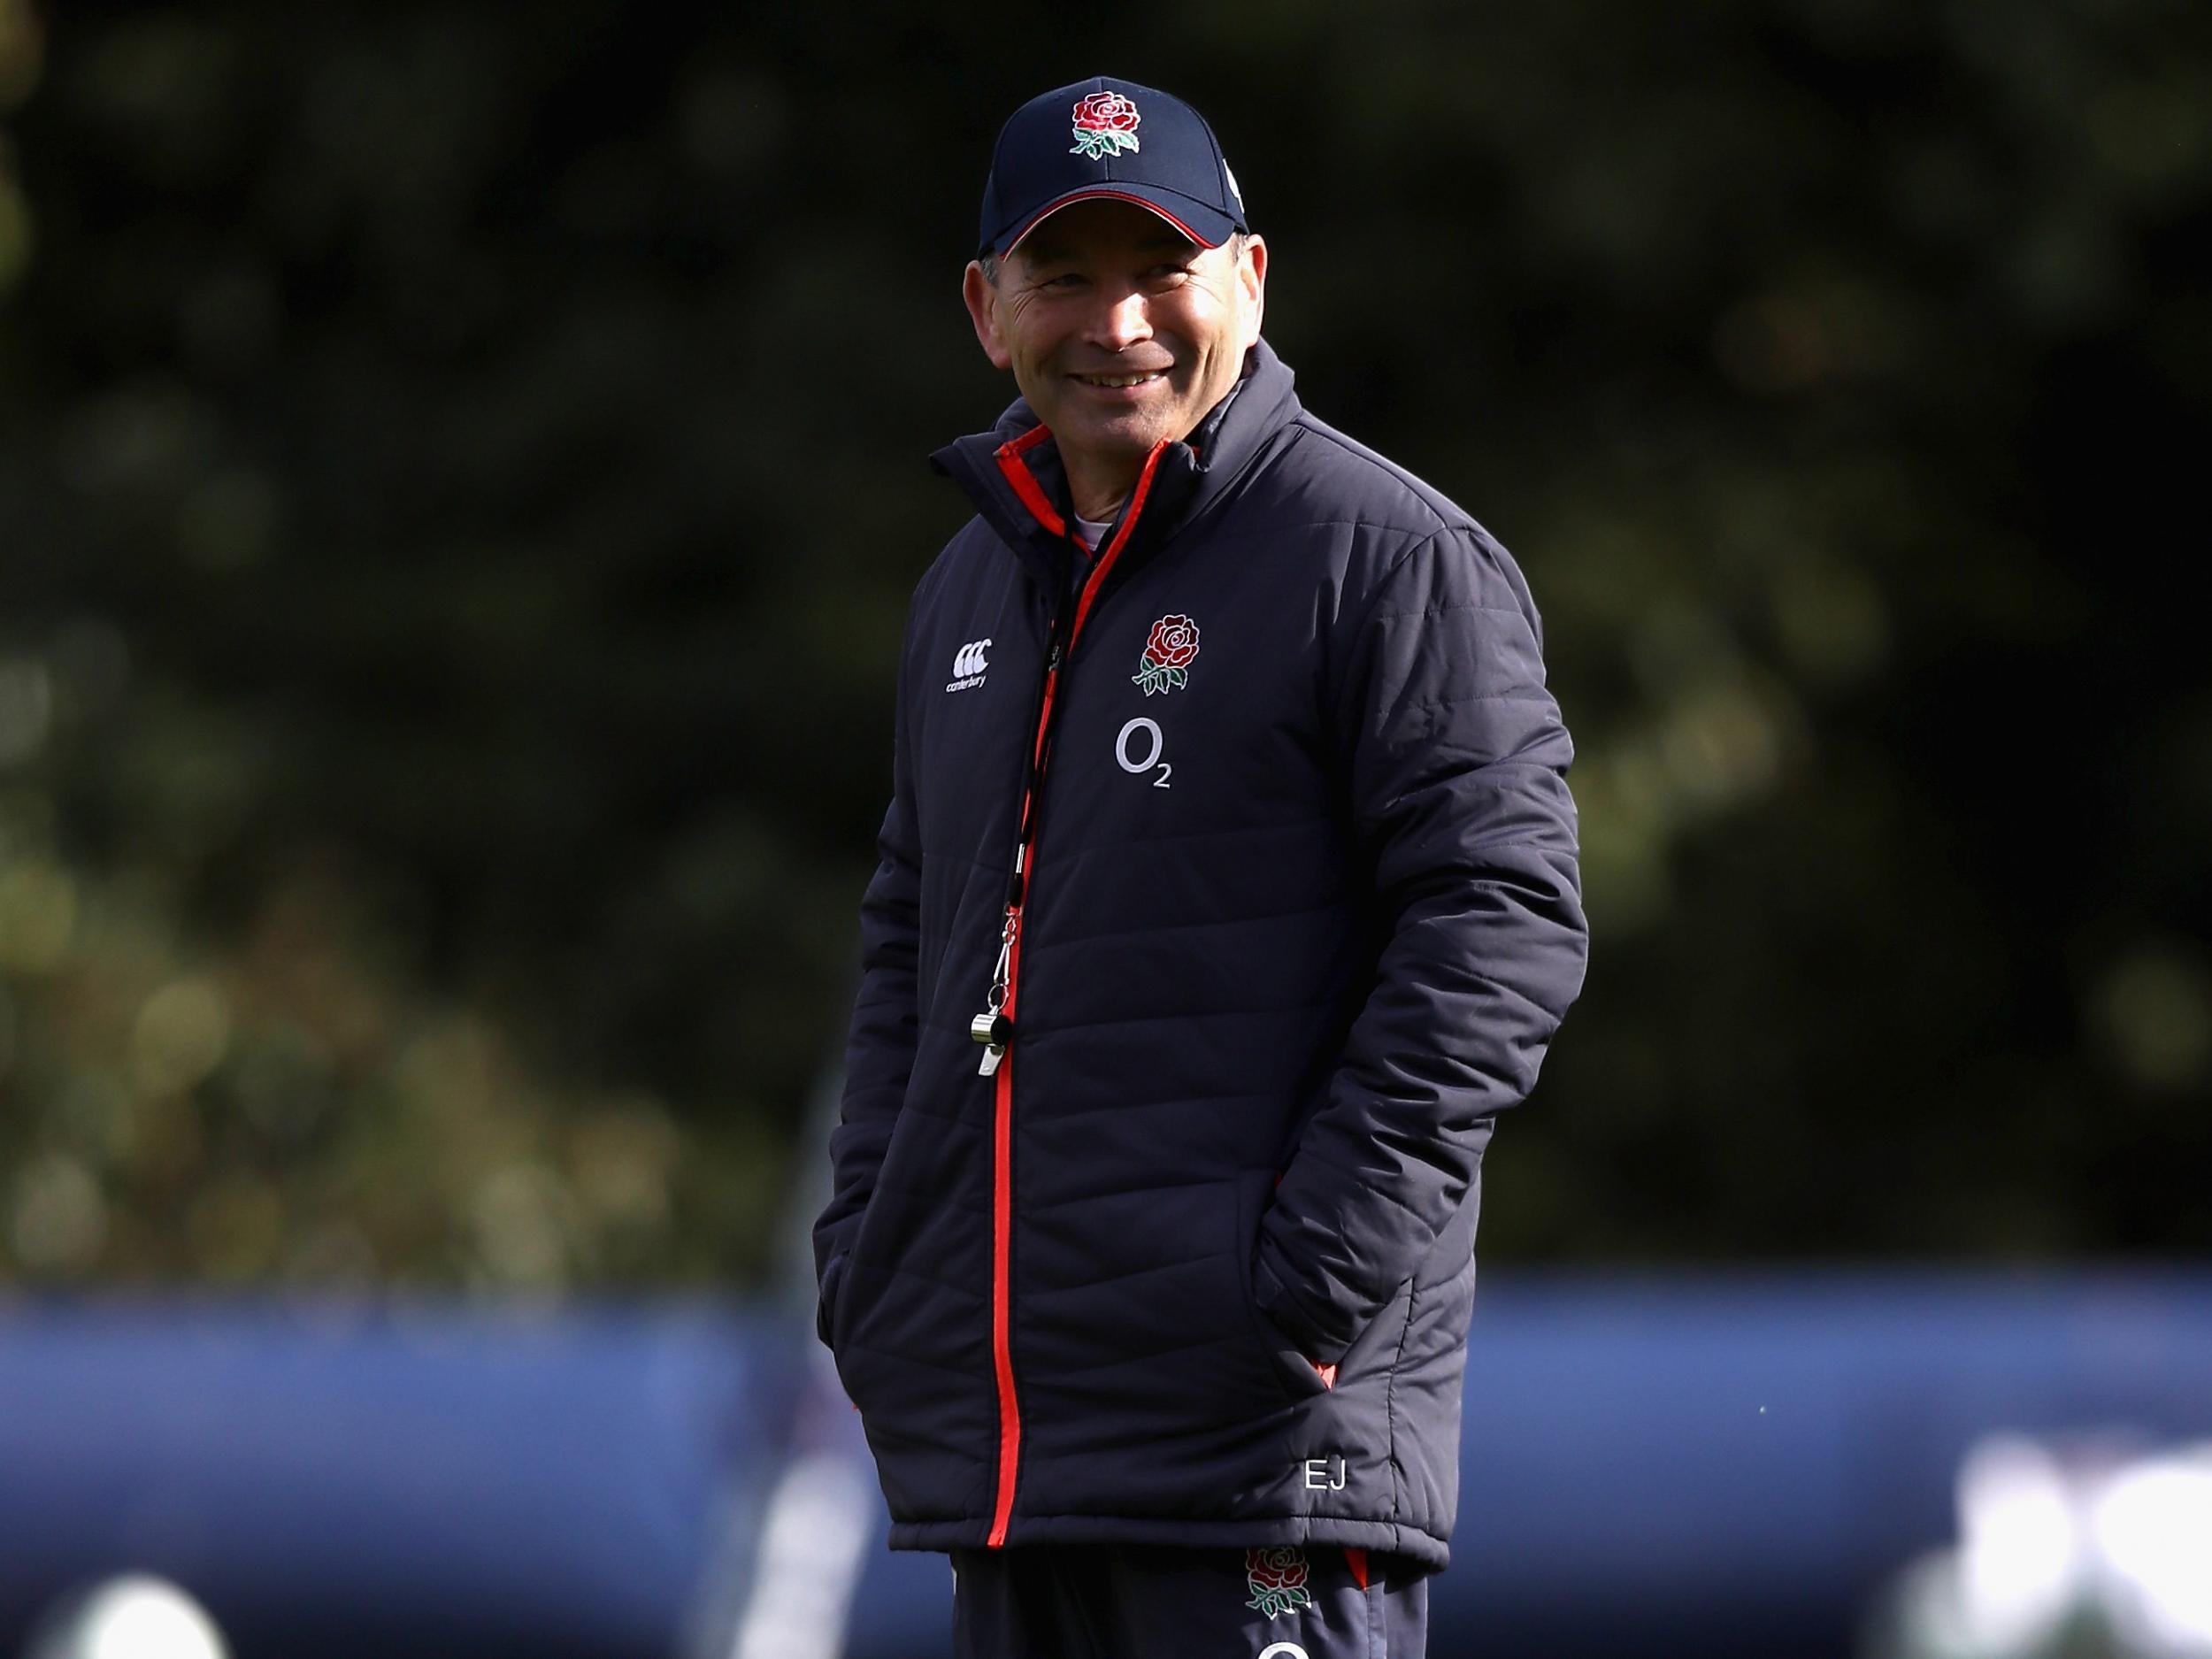 Eddie Jones admitted even he is not bulletproof when it comes to the cut-throat nature of elite sport